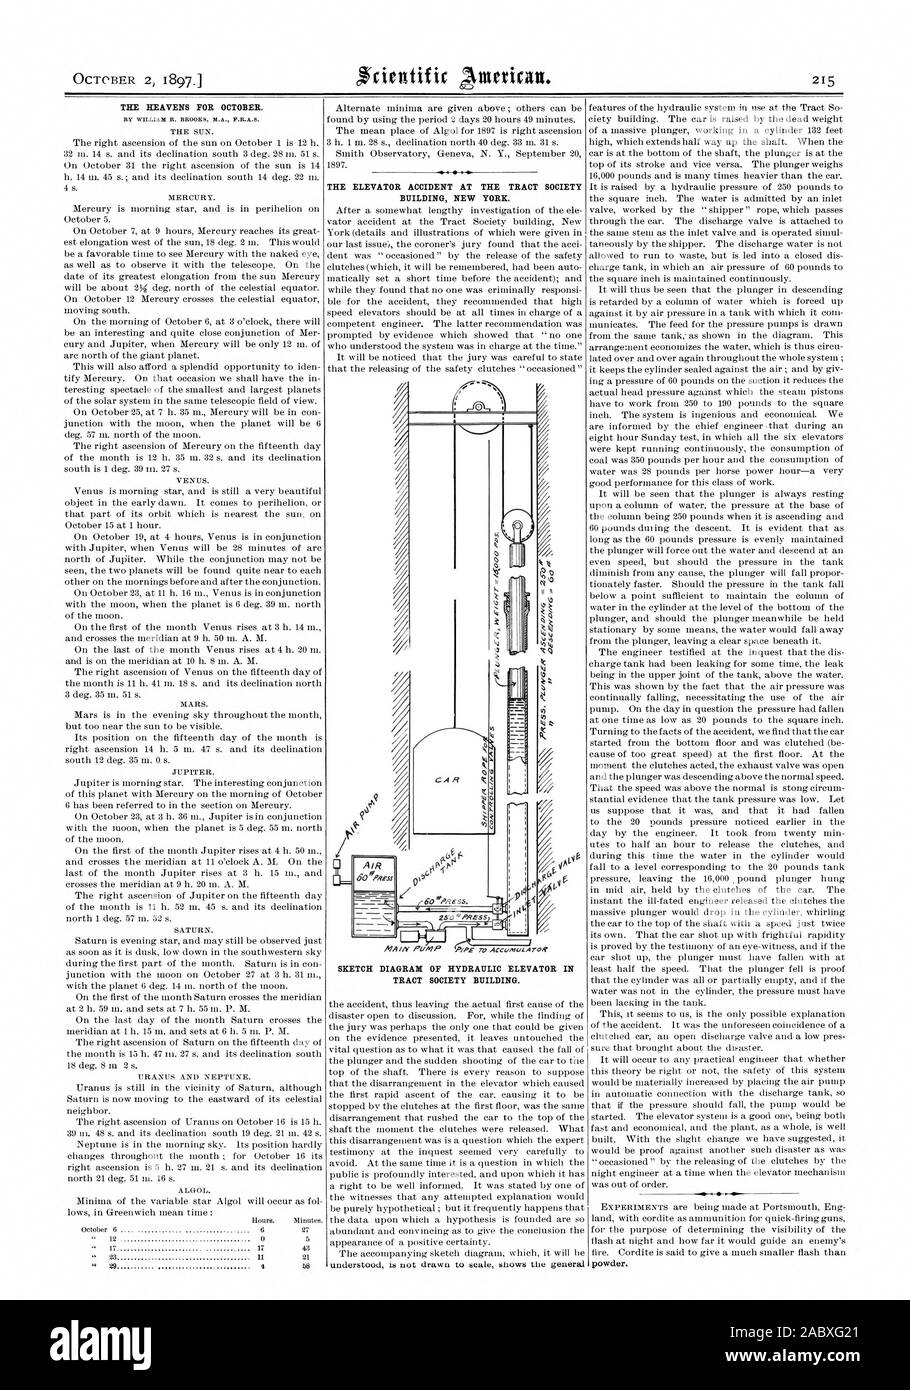 THE HEAVENS FOR OCTOBER. THE ELEVATOR ACCIDENT AT THE TRACT SOCIETY BUILDING NEW YORK. SKETCH DIAGRAM OF HYDRAULIC ELEVATOR IN TRACT SOCIETY BUILDING., scientific american, 1897-10-02 Stock Photo